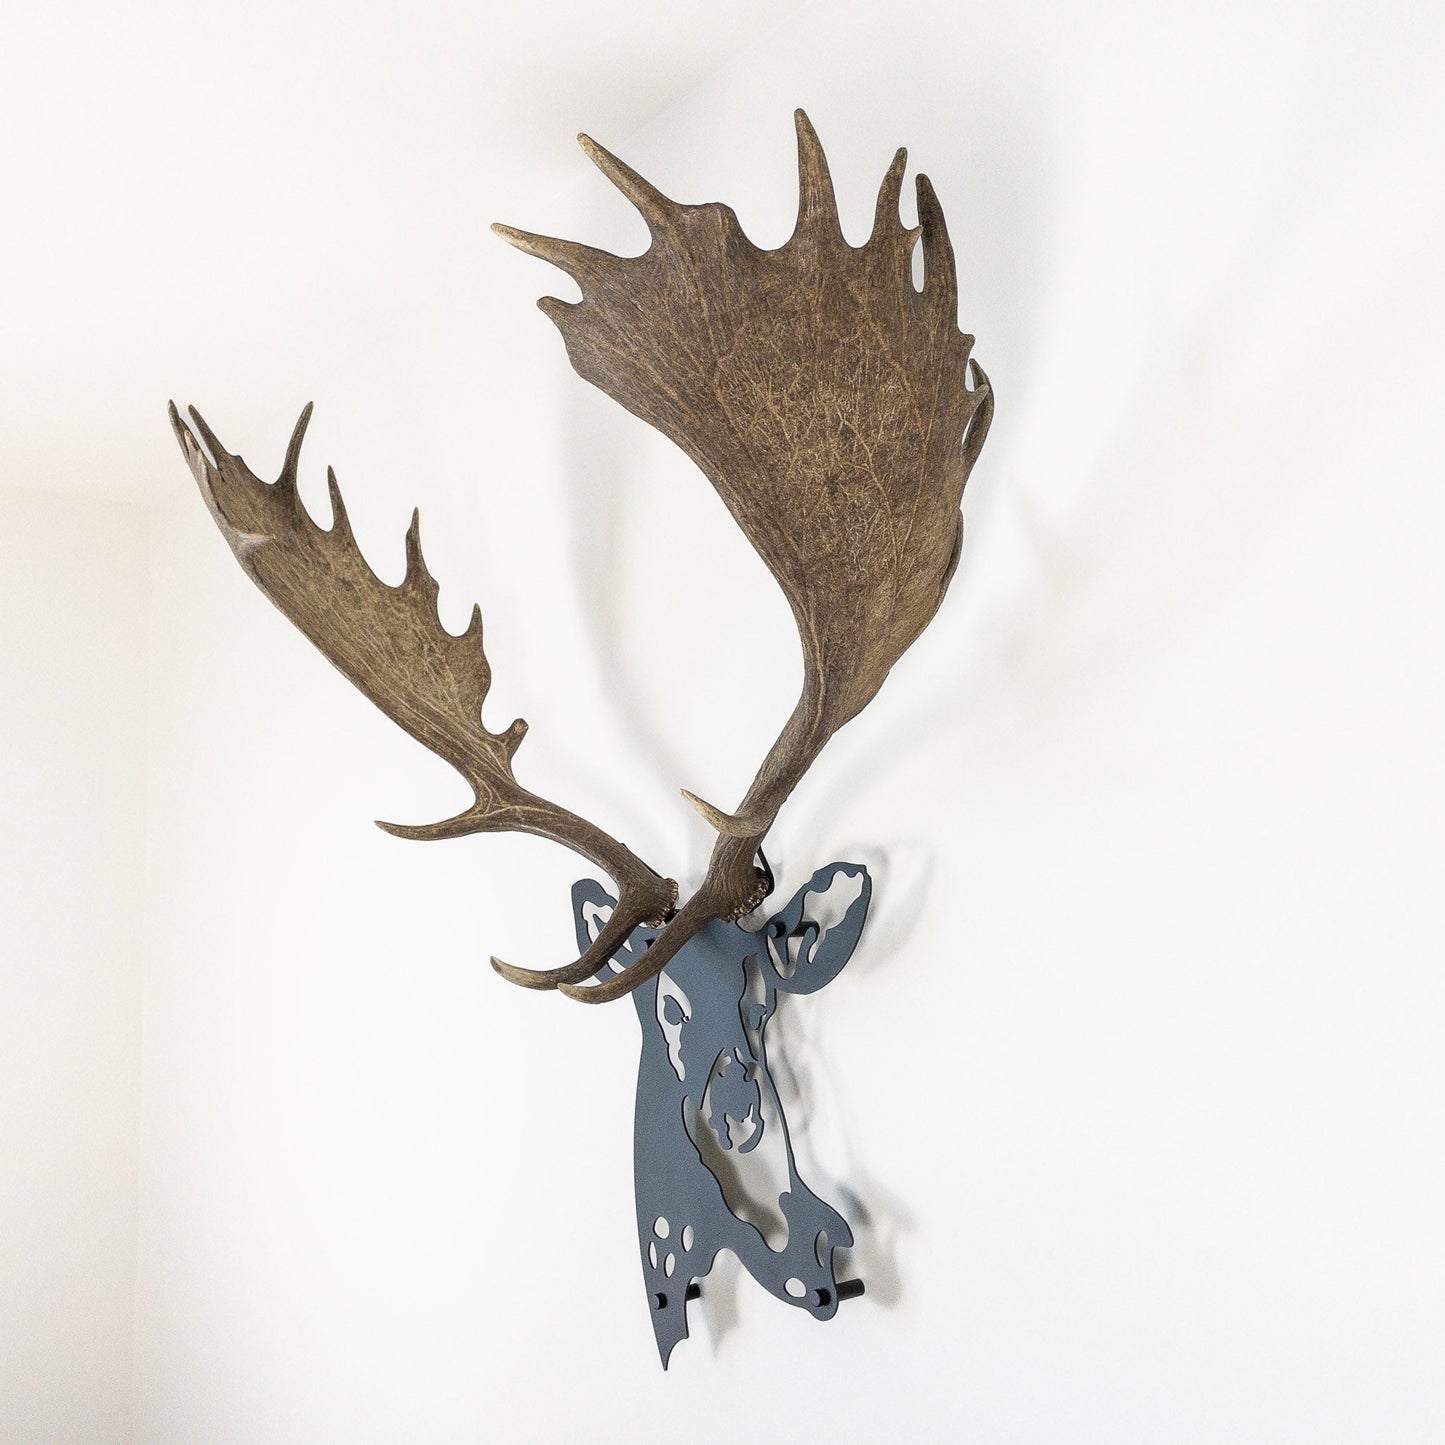 A metal wall decor made from real shed  Fallow Deer antlers mounted on a metal head